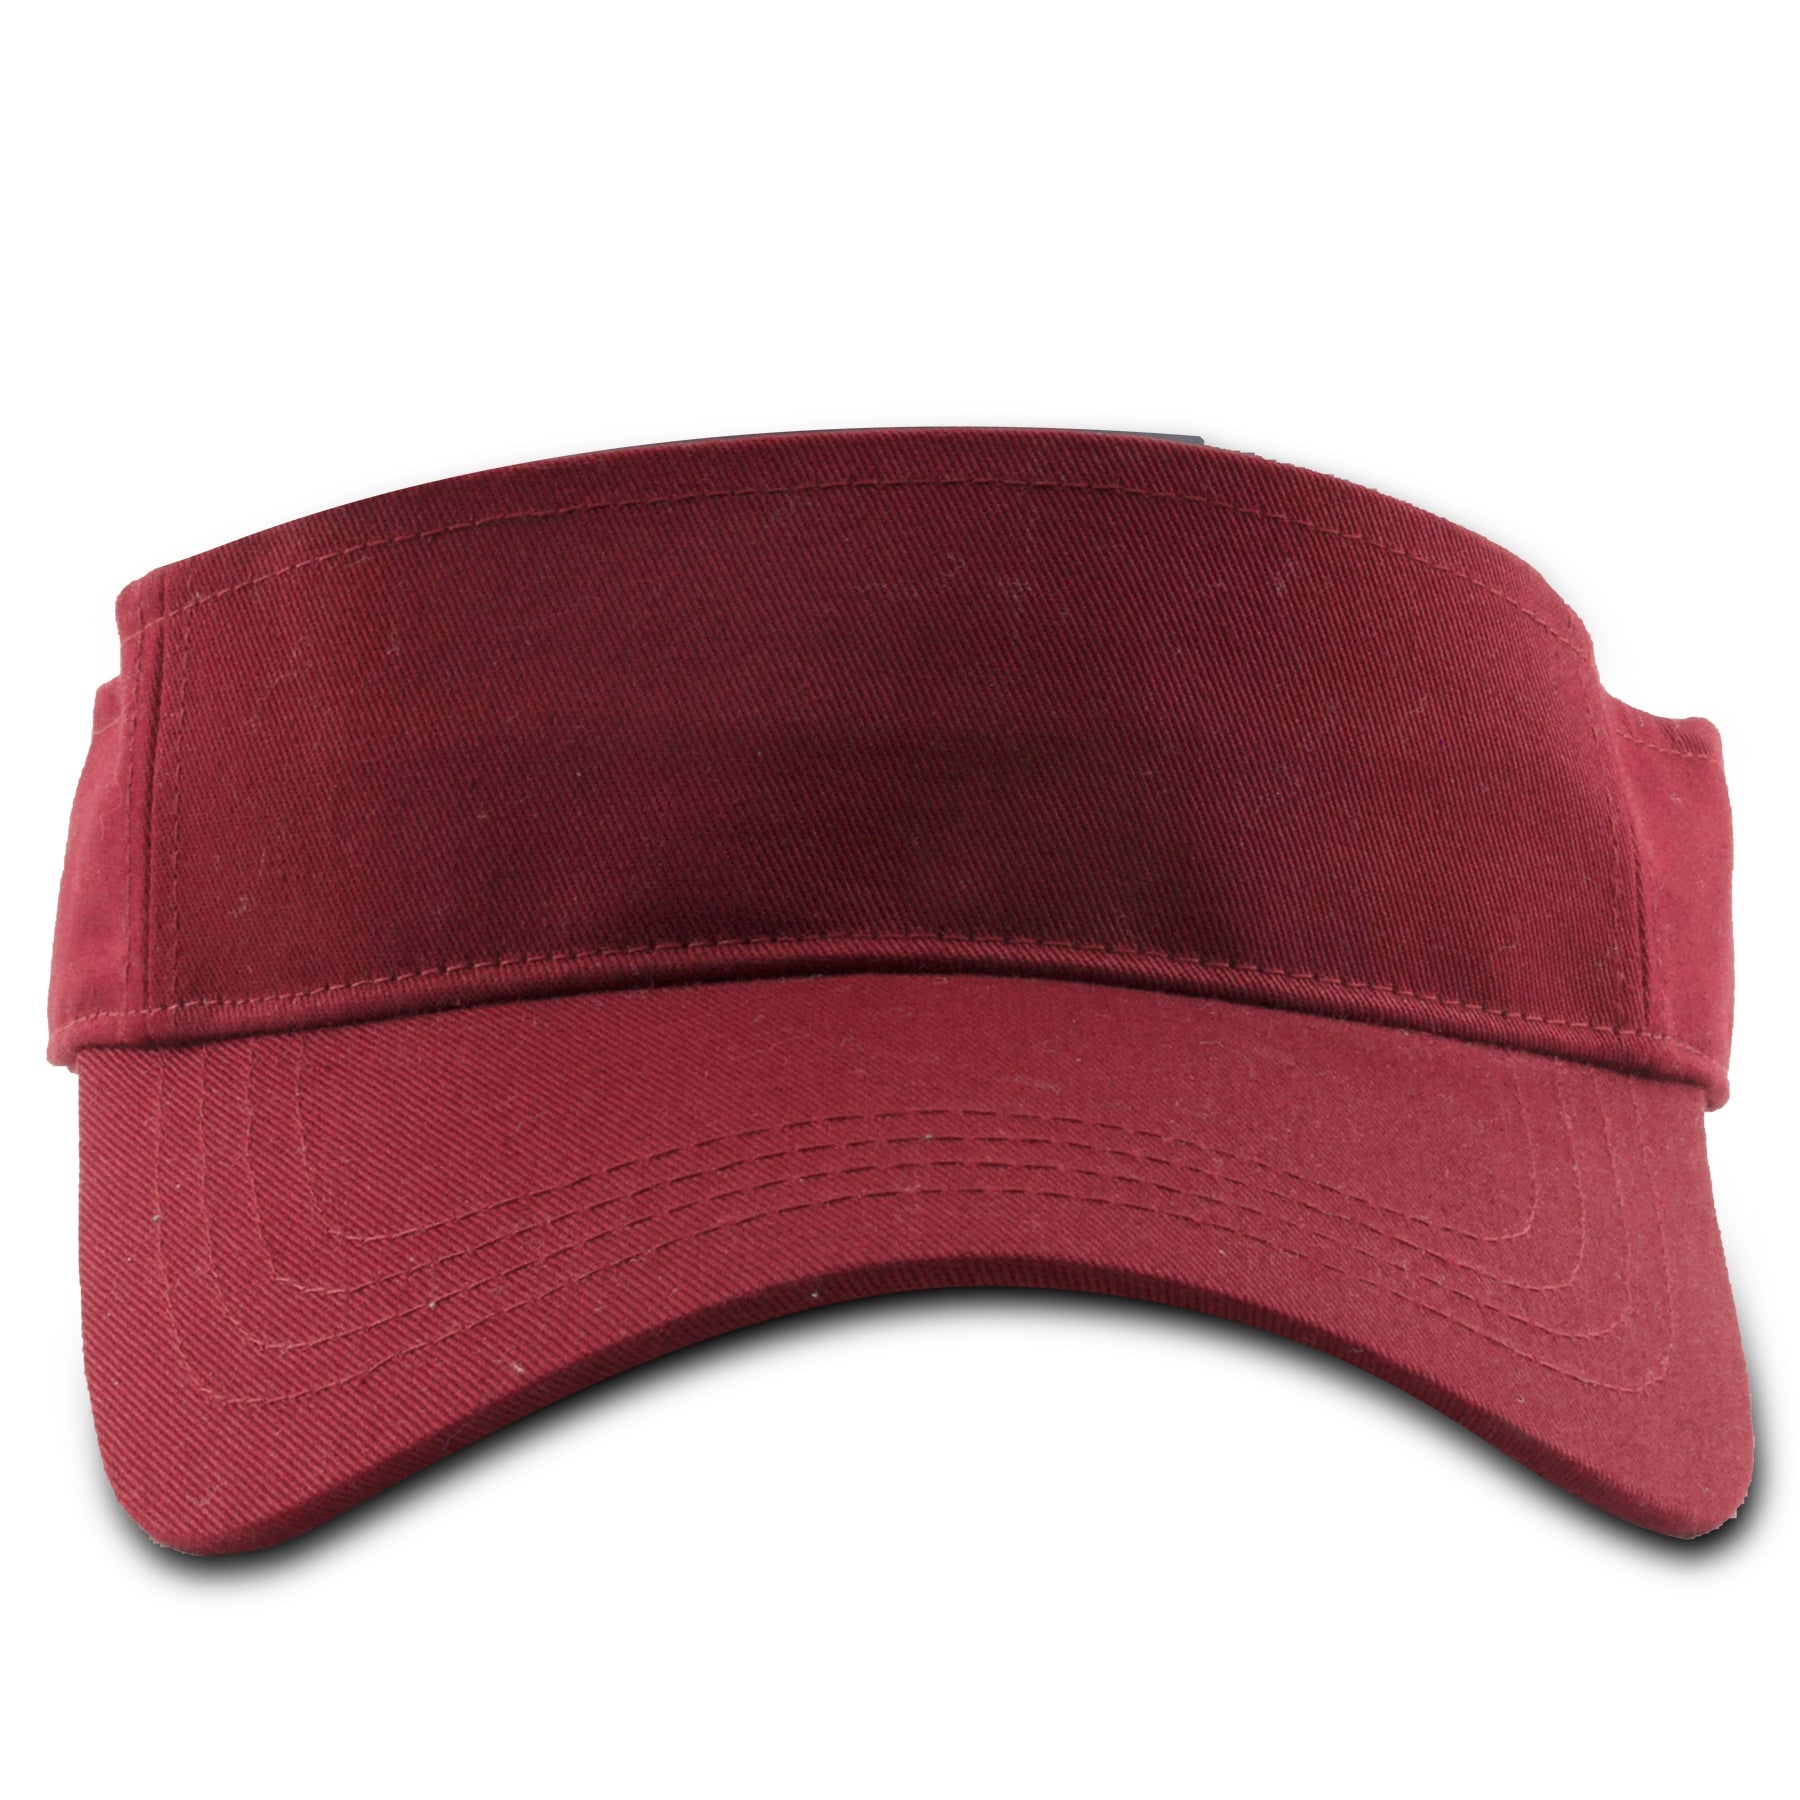 The burgundy blank adjustable visor has a bent brim and a mid-height front crown